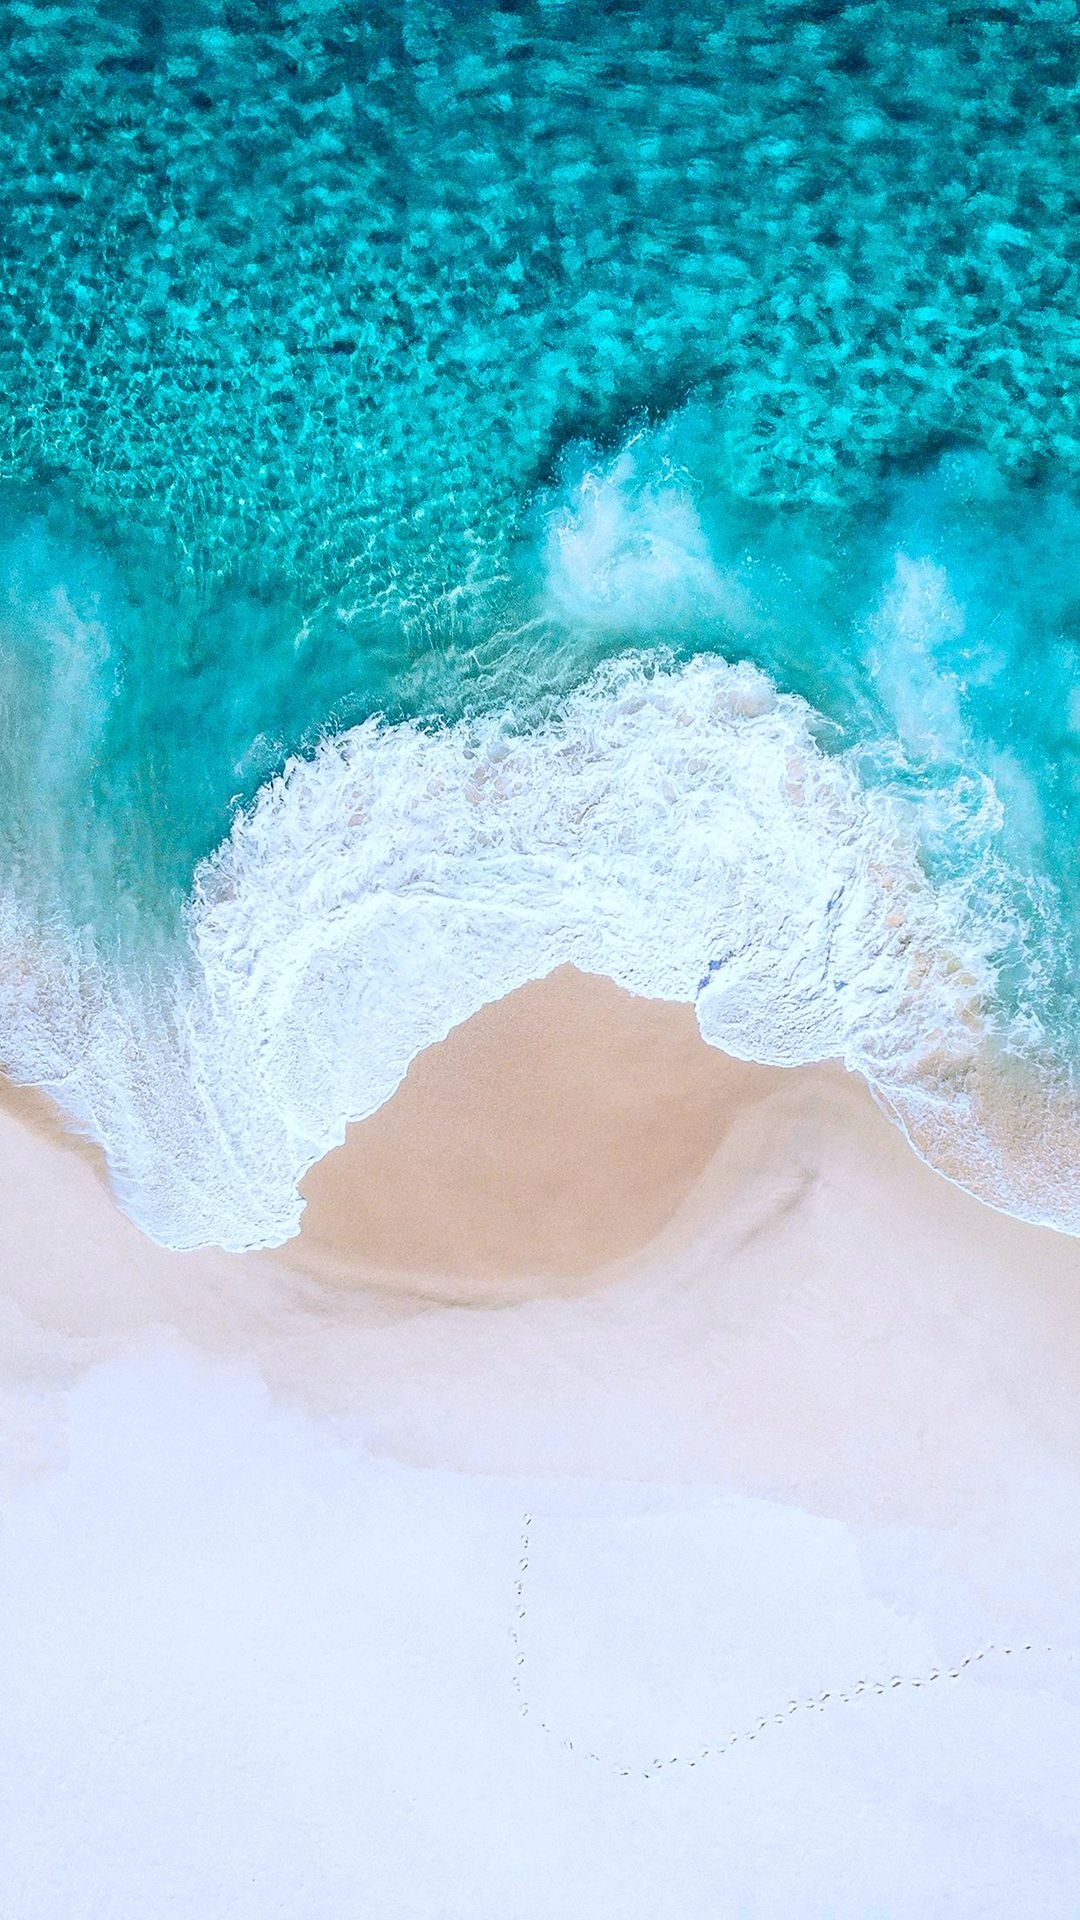 Ocean landscape, Pure nature, Crystal waves, iPhone wallpapers, 1080x1920 Full HD Handy